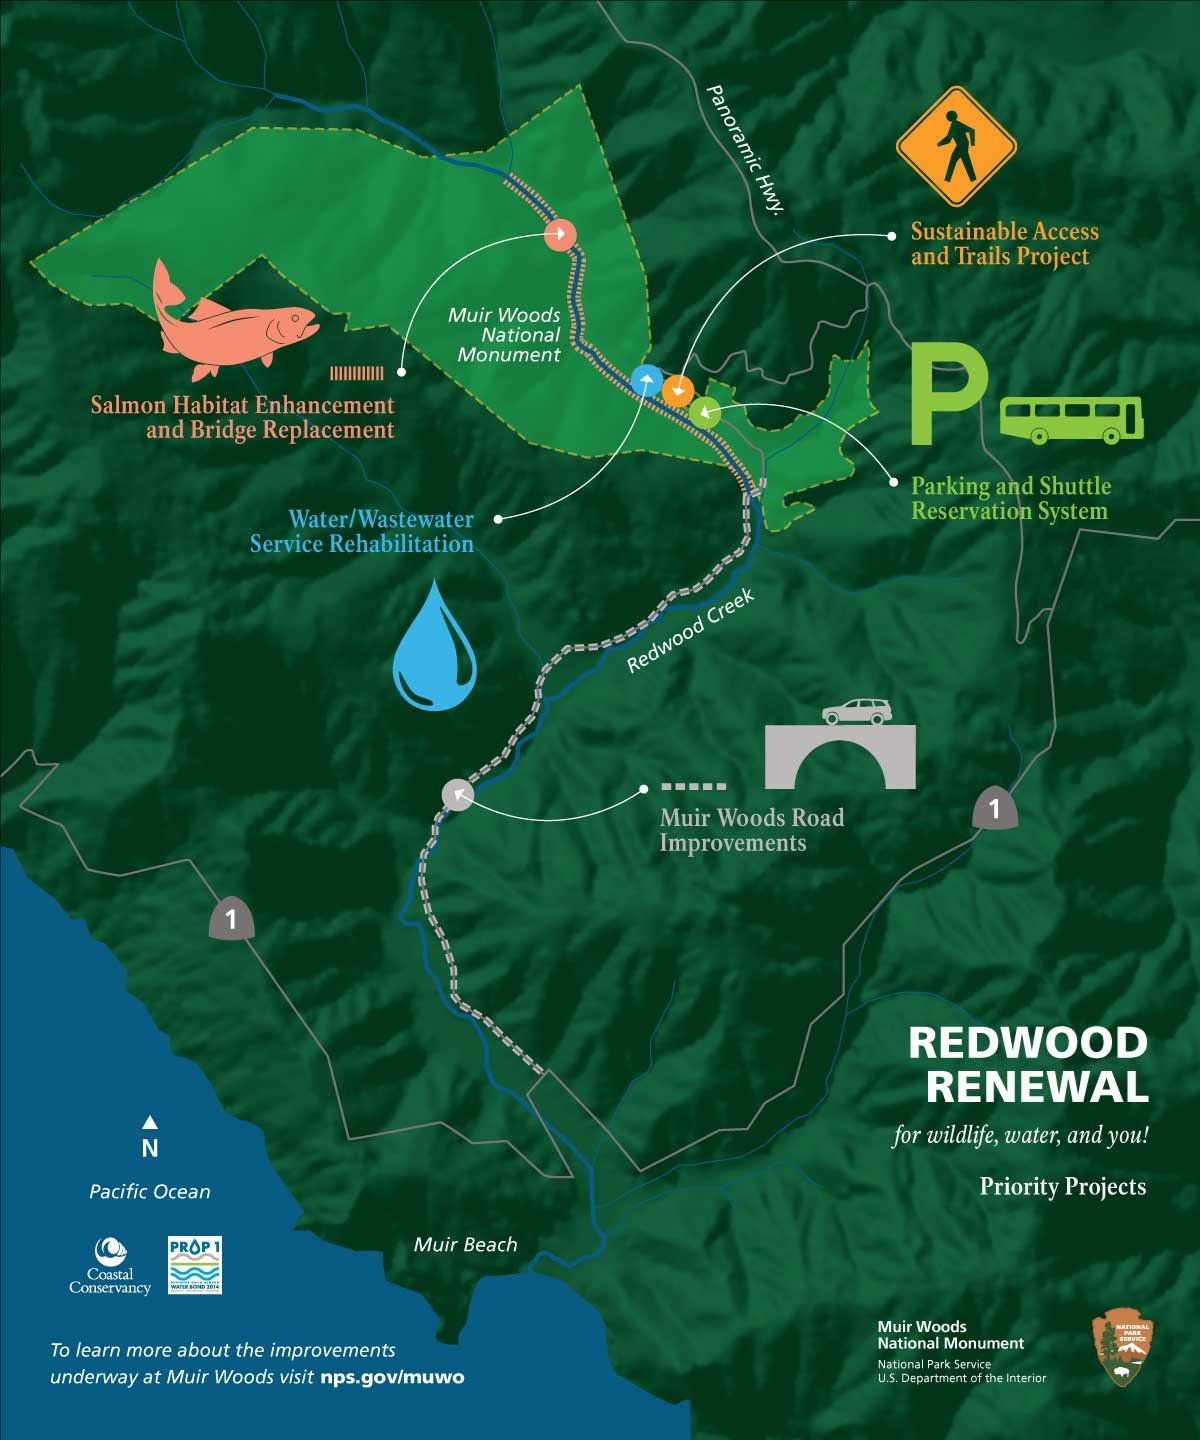 Map of Redwood Renewal Projects